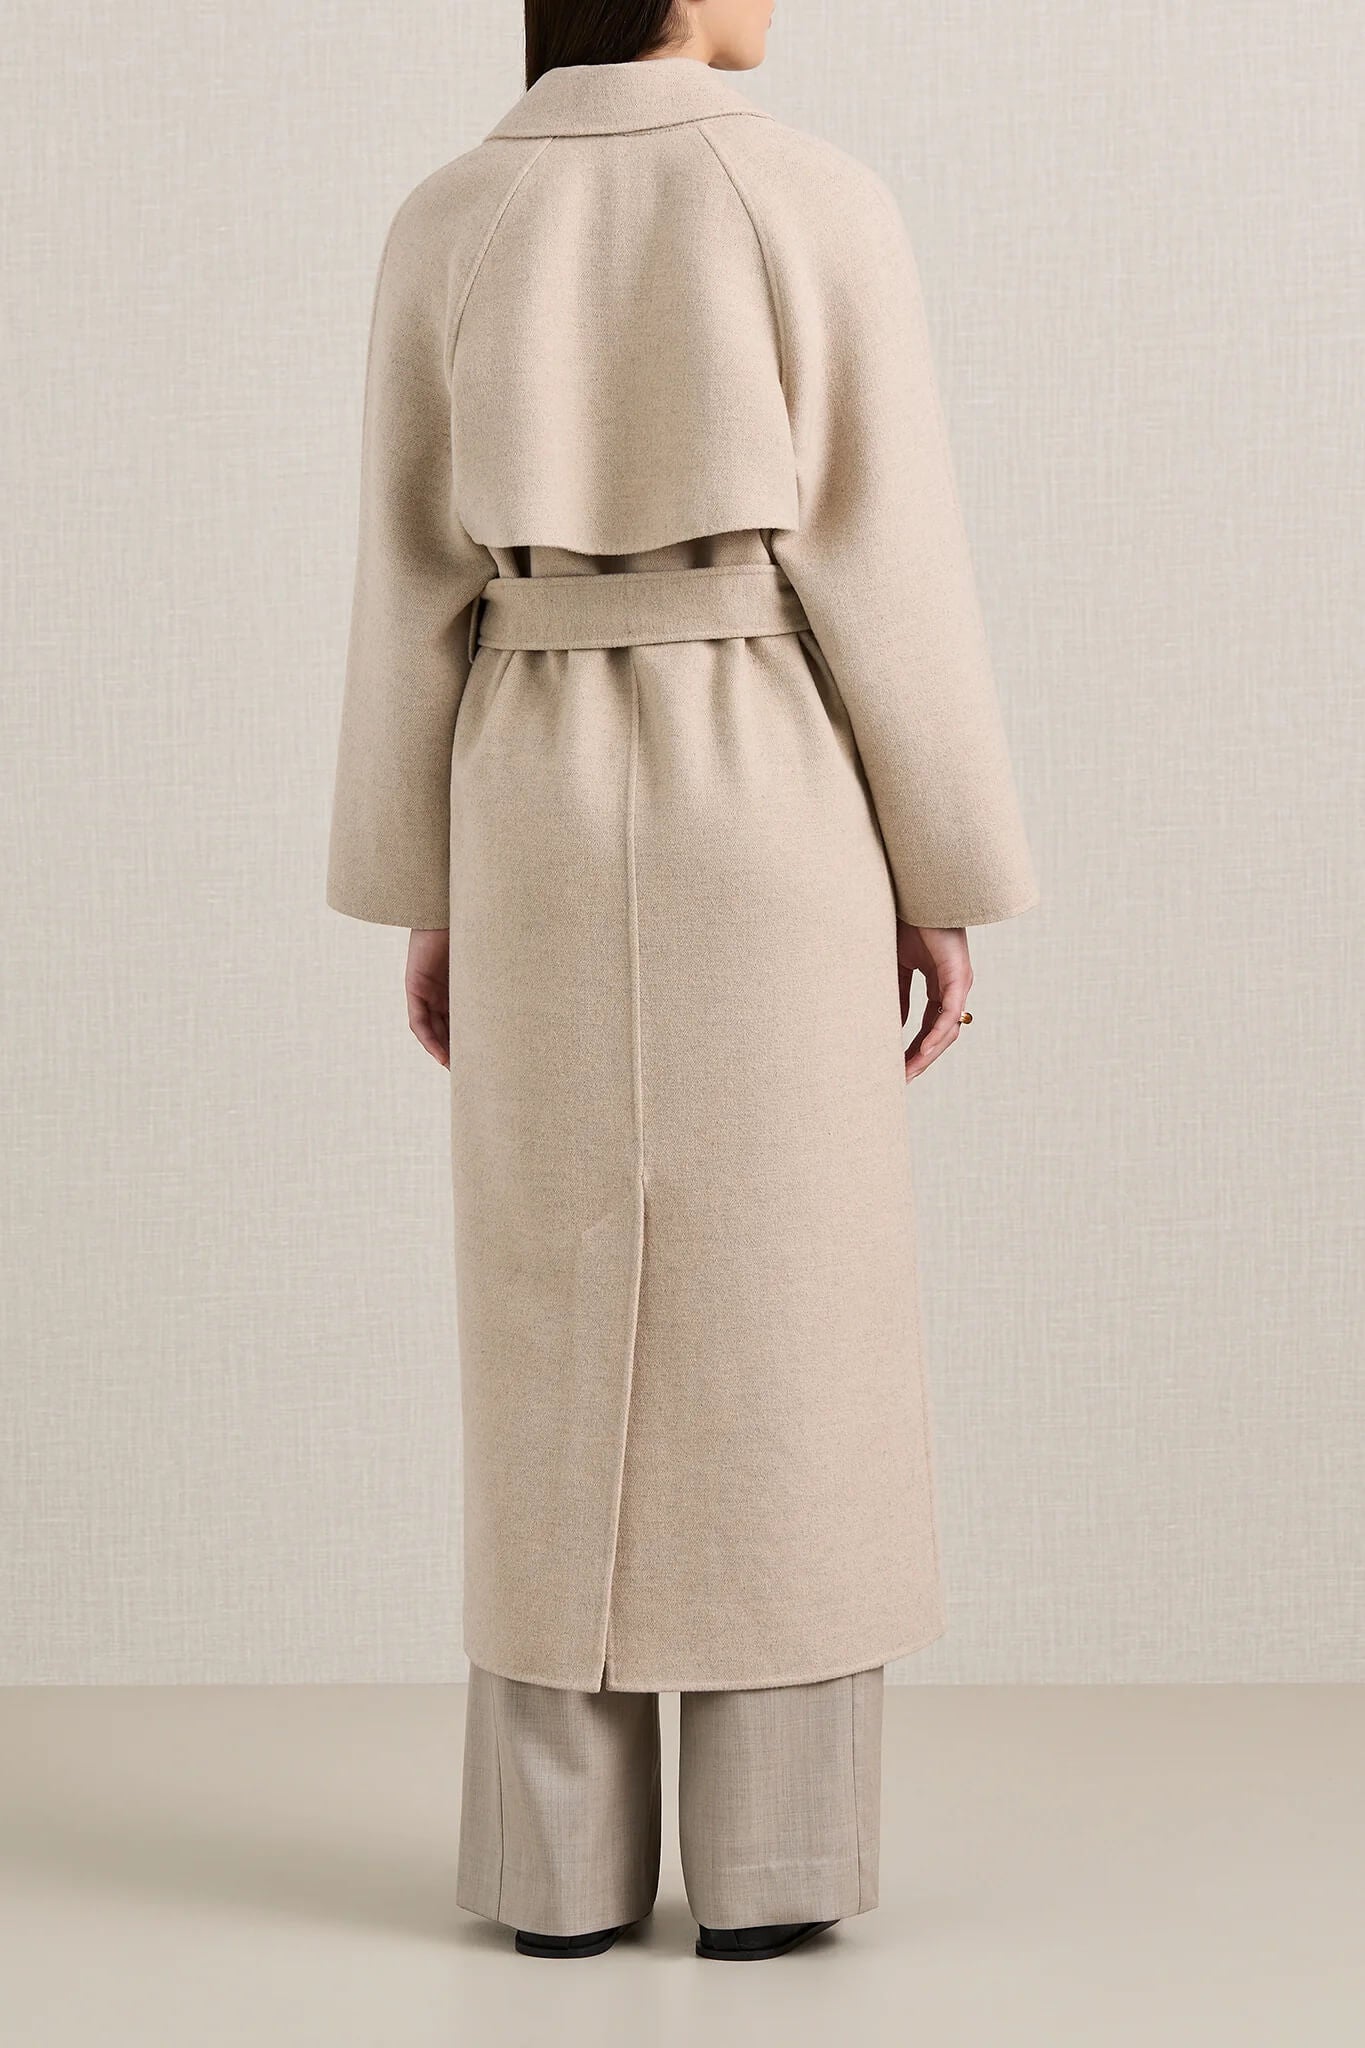 The A.EMERY Evans Coat in Almond Melange available at The New Trend.